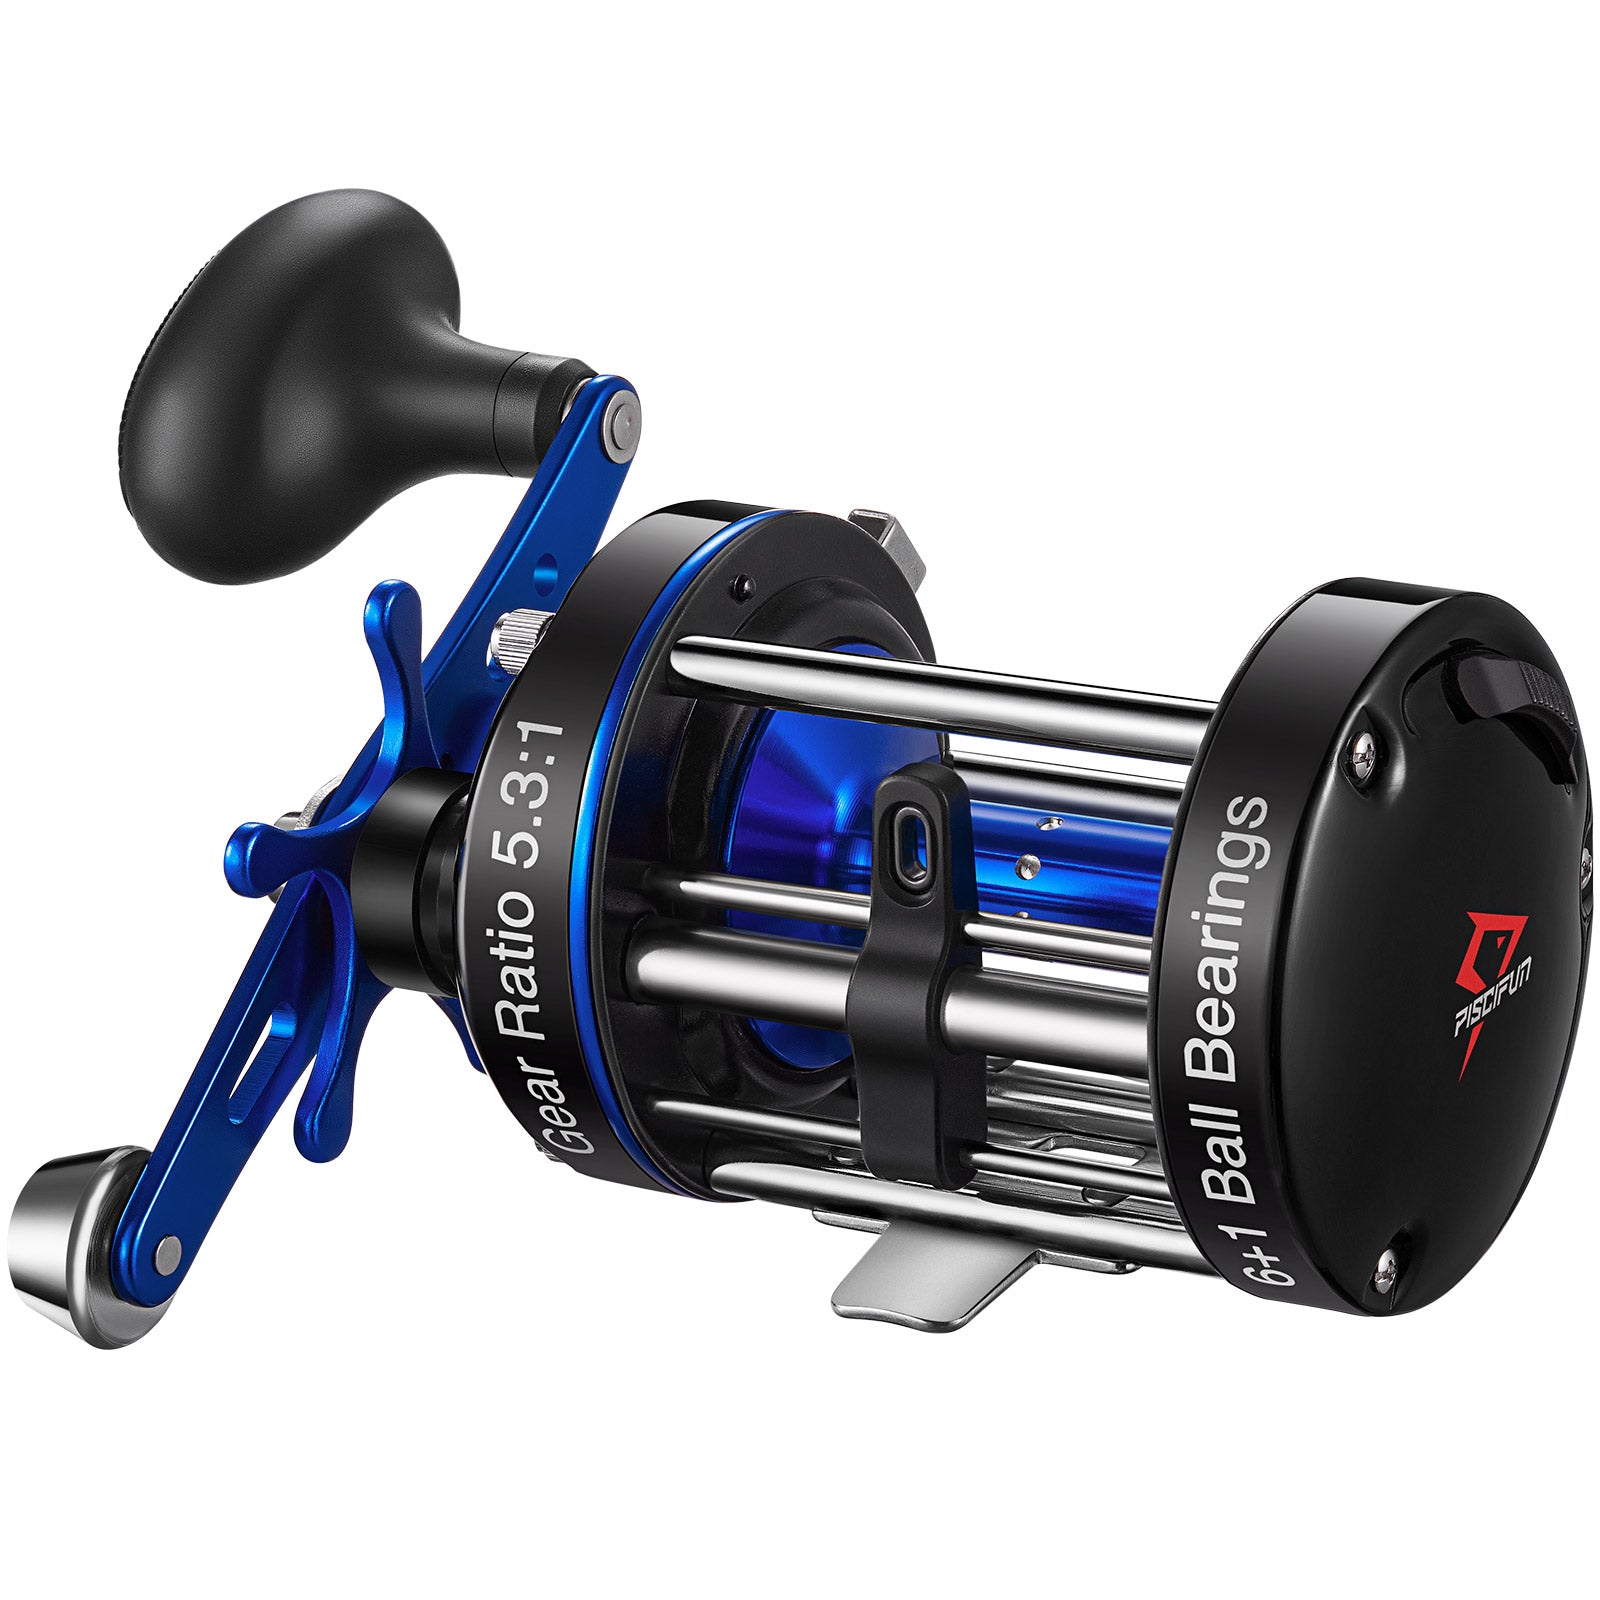 Piscifun® Chaos XS Round Baitcasting Reel, Saltwater Casting Reels